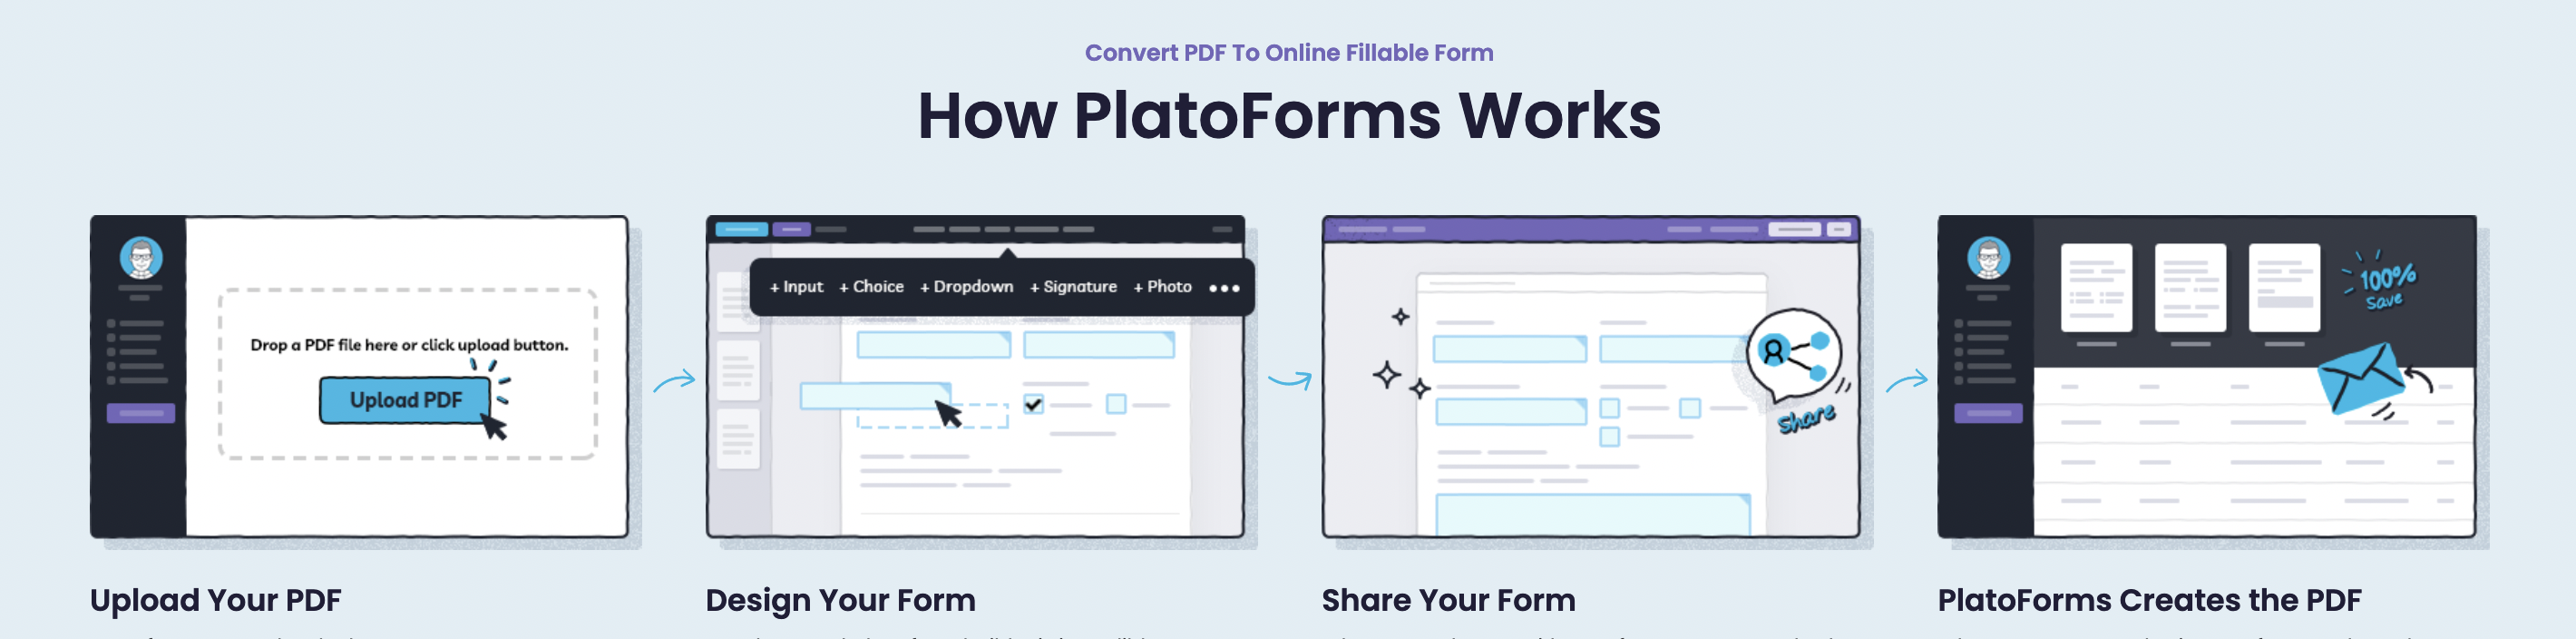 How PlatoForms Works